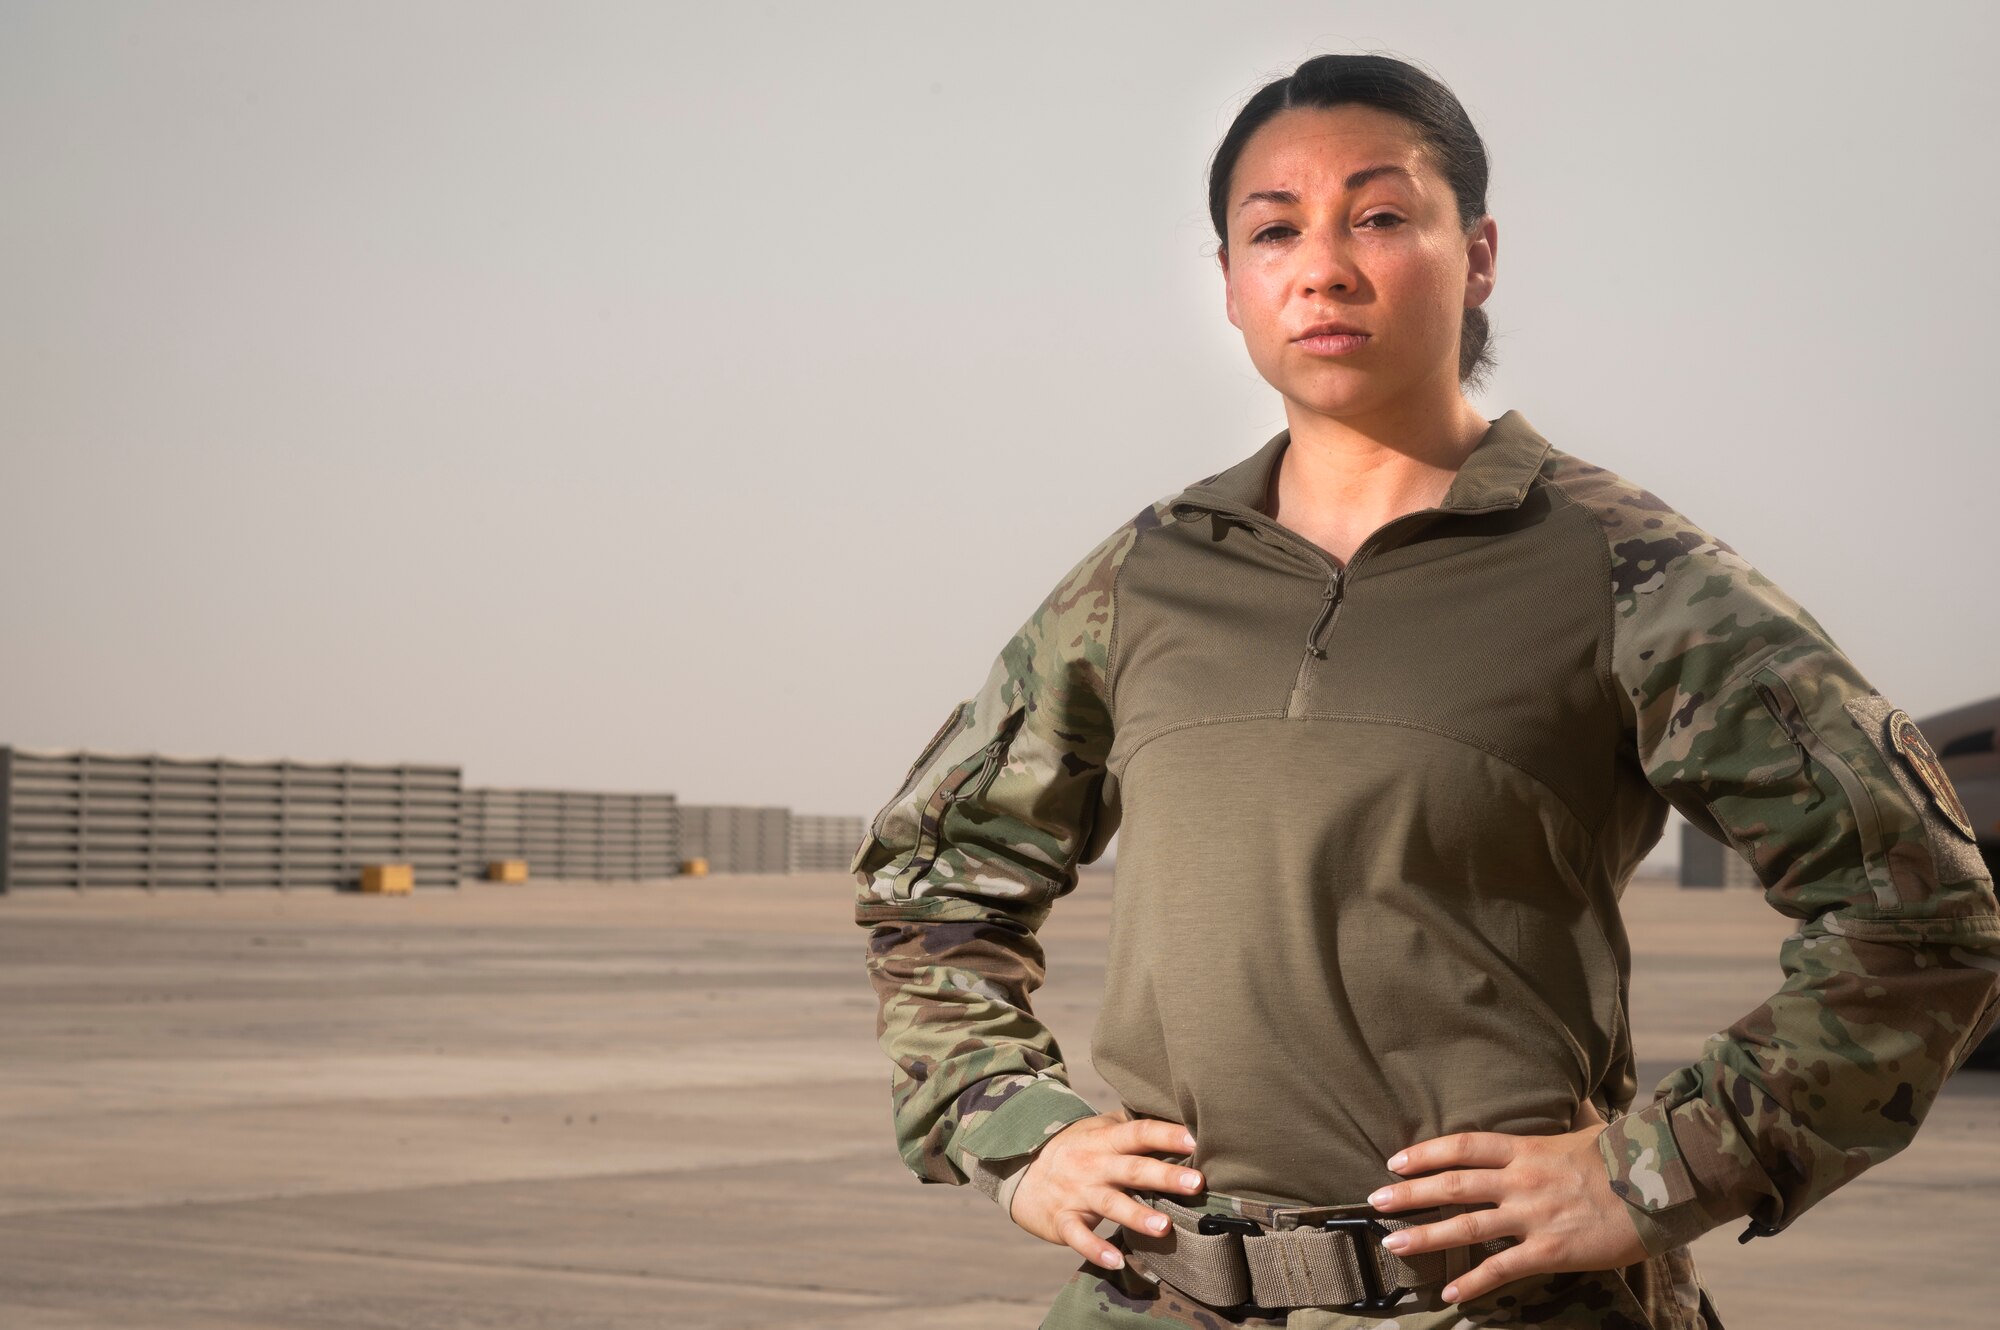 U.S. Air Force Capt. Briana Quintana, 378th Air Expeditionary Wing, A1/6/7/FP project officer, was one of five Liaison Officers deployed during Operation Agile Spartan III at an undisclosed location, September 2, 2022. Liaising with key personnel from Ali Al Salem Air Base, Kuwait, they ensured all support requirements were met prior to fighter jets from Prince Sultan Air Base, Kingdom of Saudi Arabia, being deployed to the location. (U.S. Air Force photo by Staff Sgt. Dalton Williams)